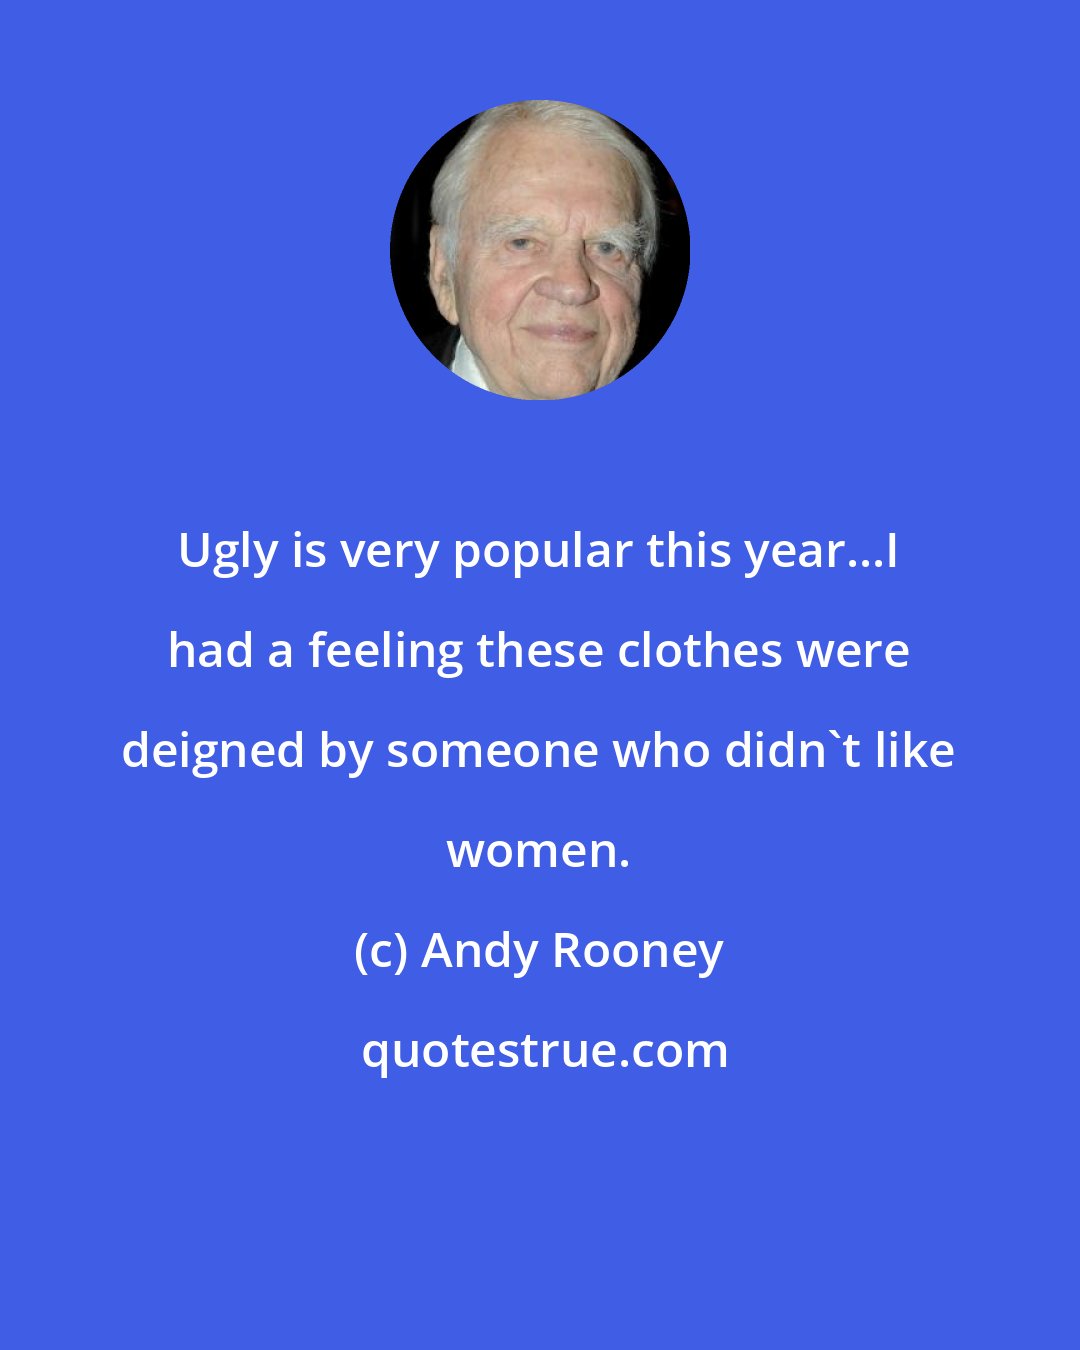 Andy Rooney: Ugly is very popular this year...I had a feeling these clothes were deigned by someone who didn't like women.